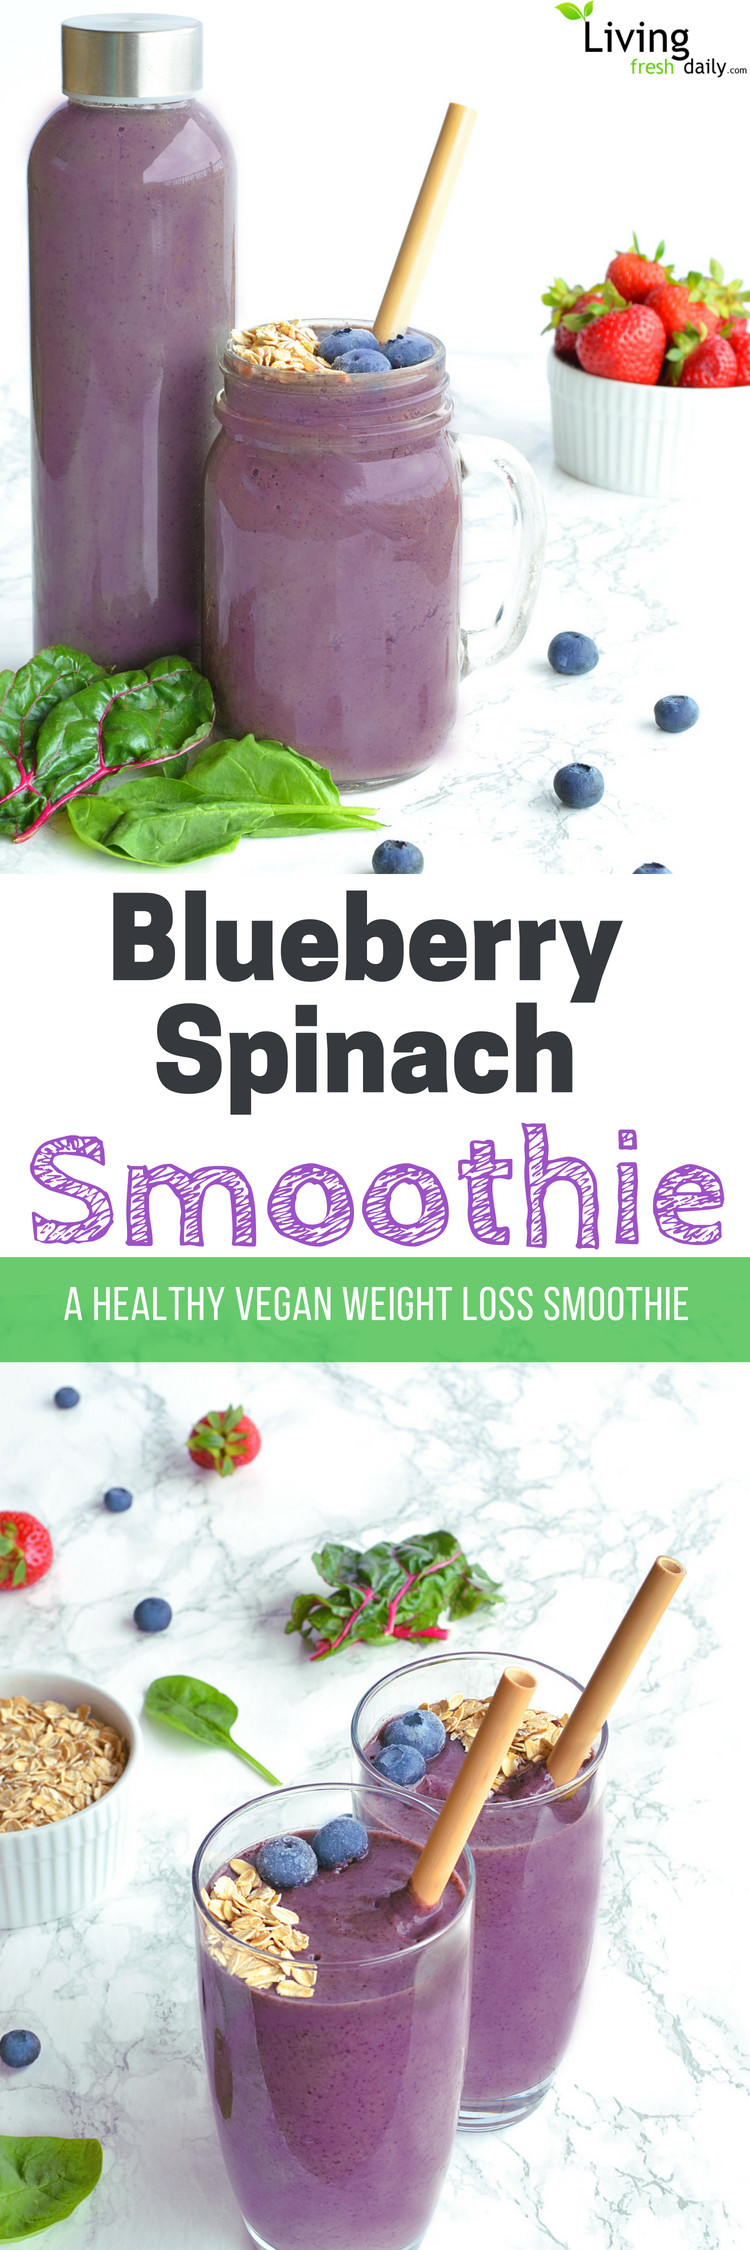 Weight Loss Smoothies Recipes With Almond Milk
 Blueberry Spinach Smoothie